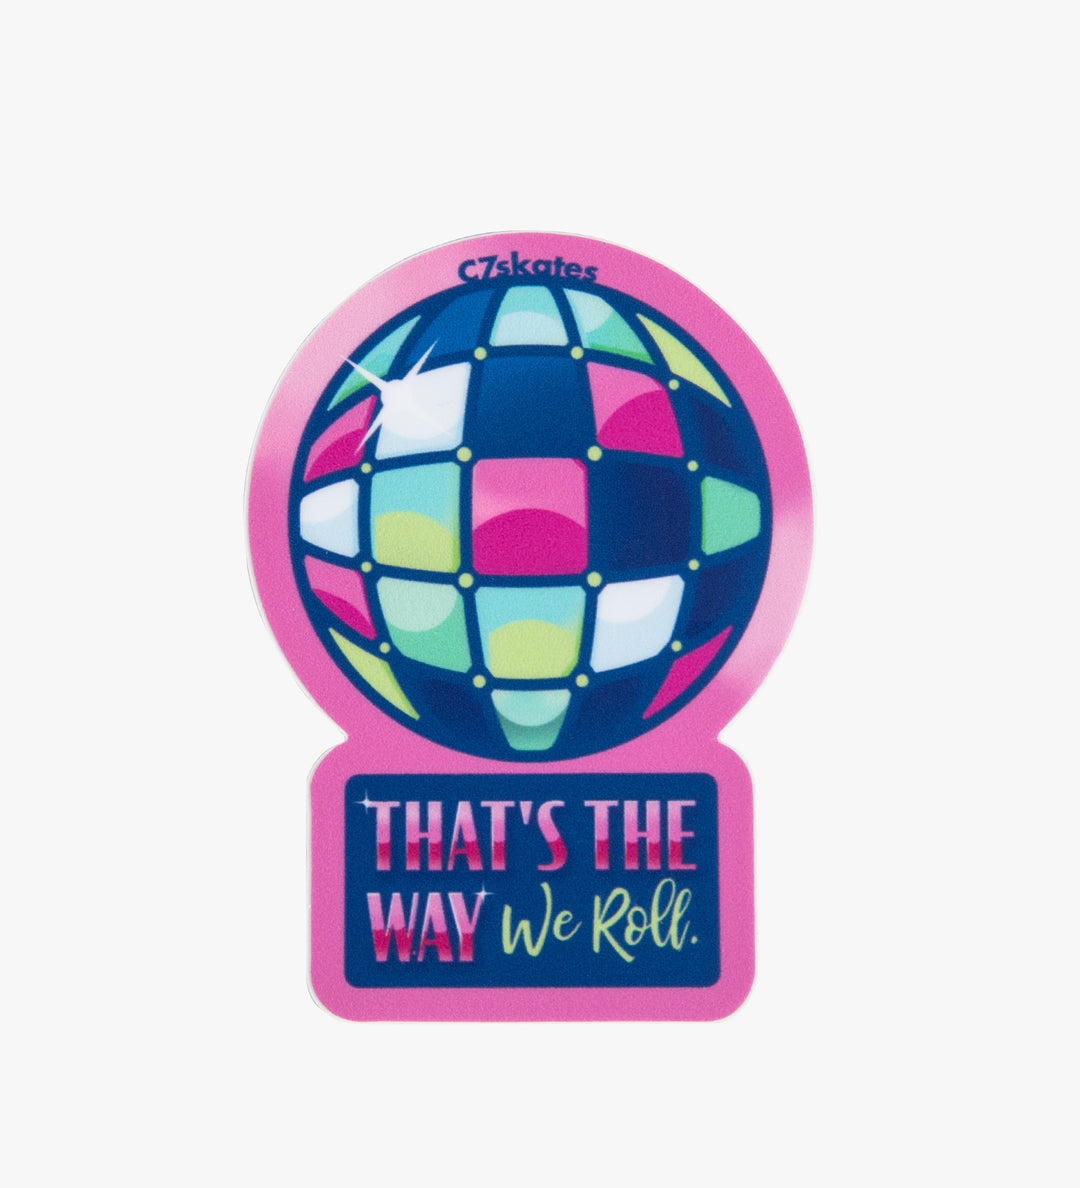 C7skates Disco Ball decorative sticker with green, blue and pink details: 2.18 x 3-inches in a matte finish print. 